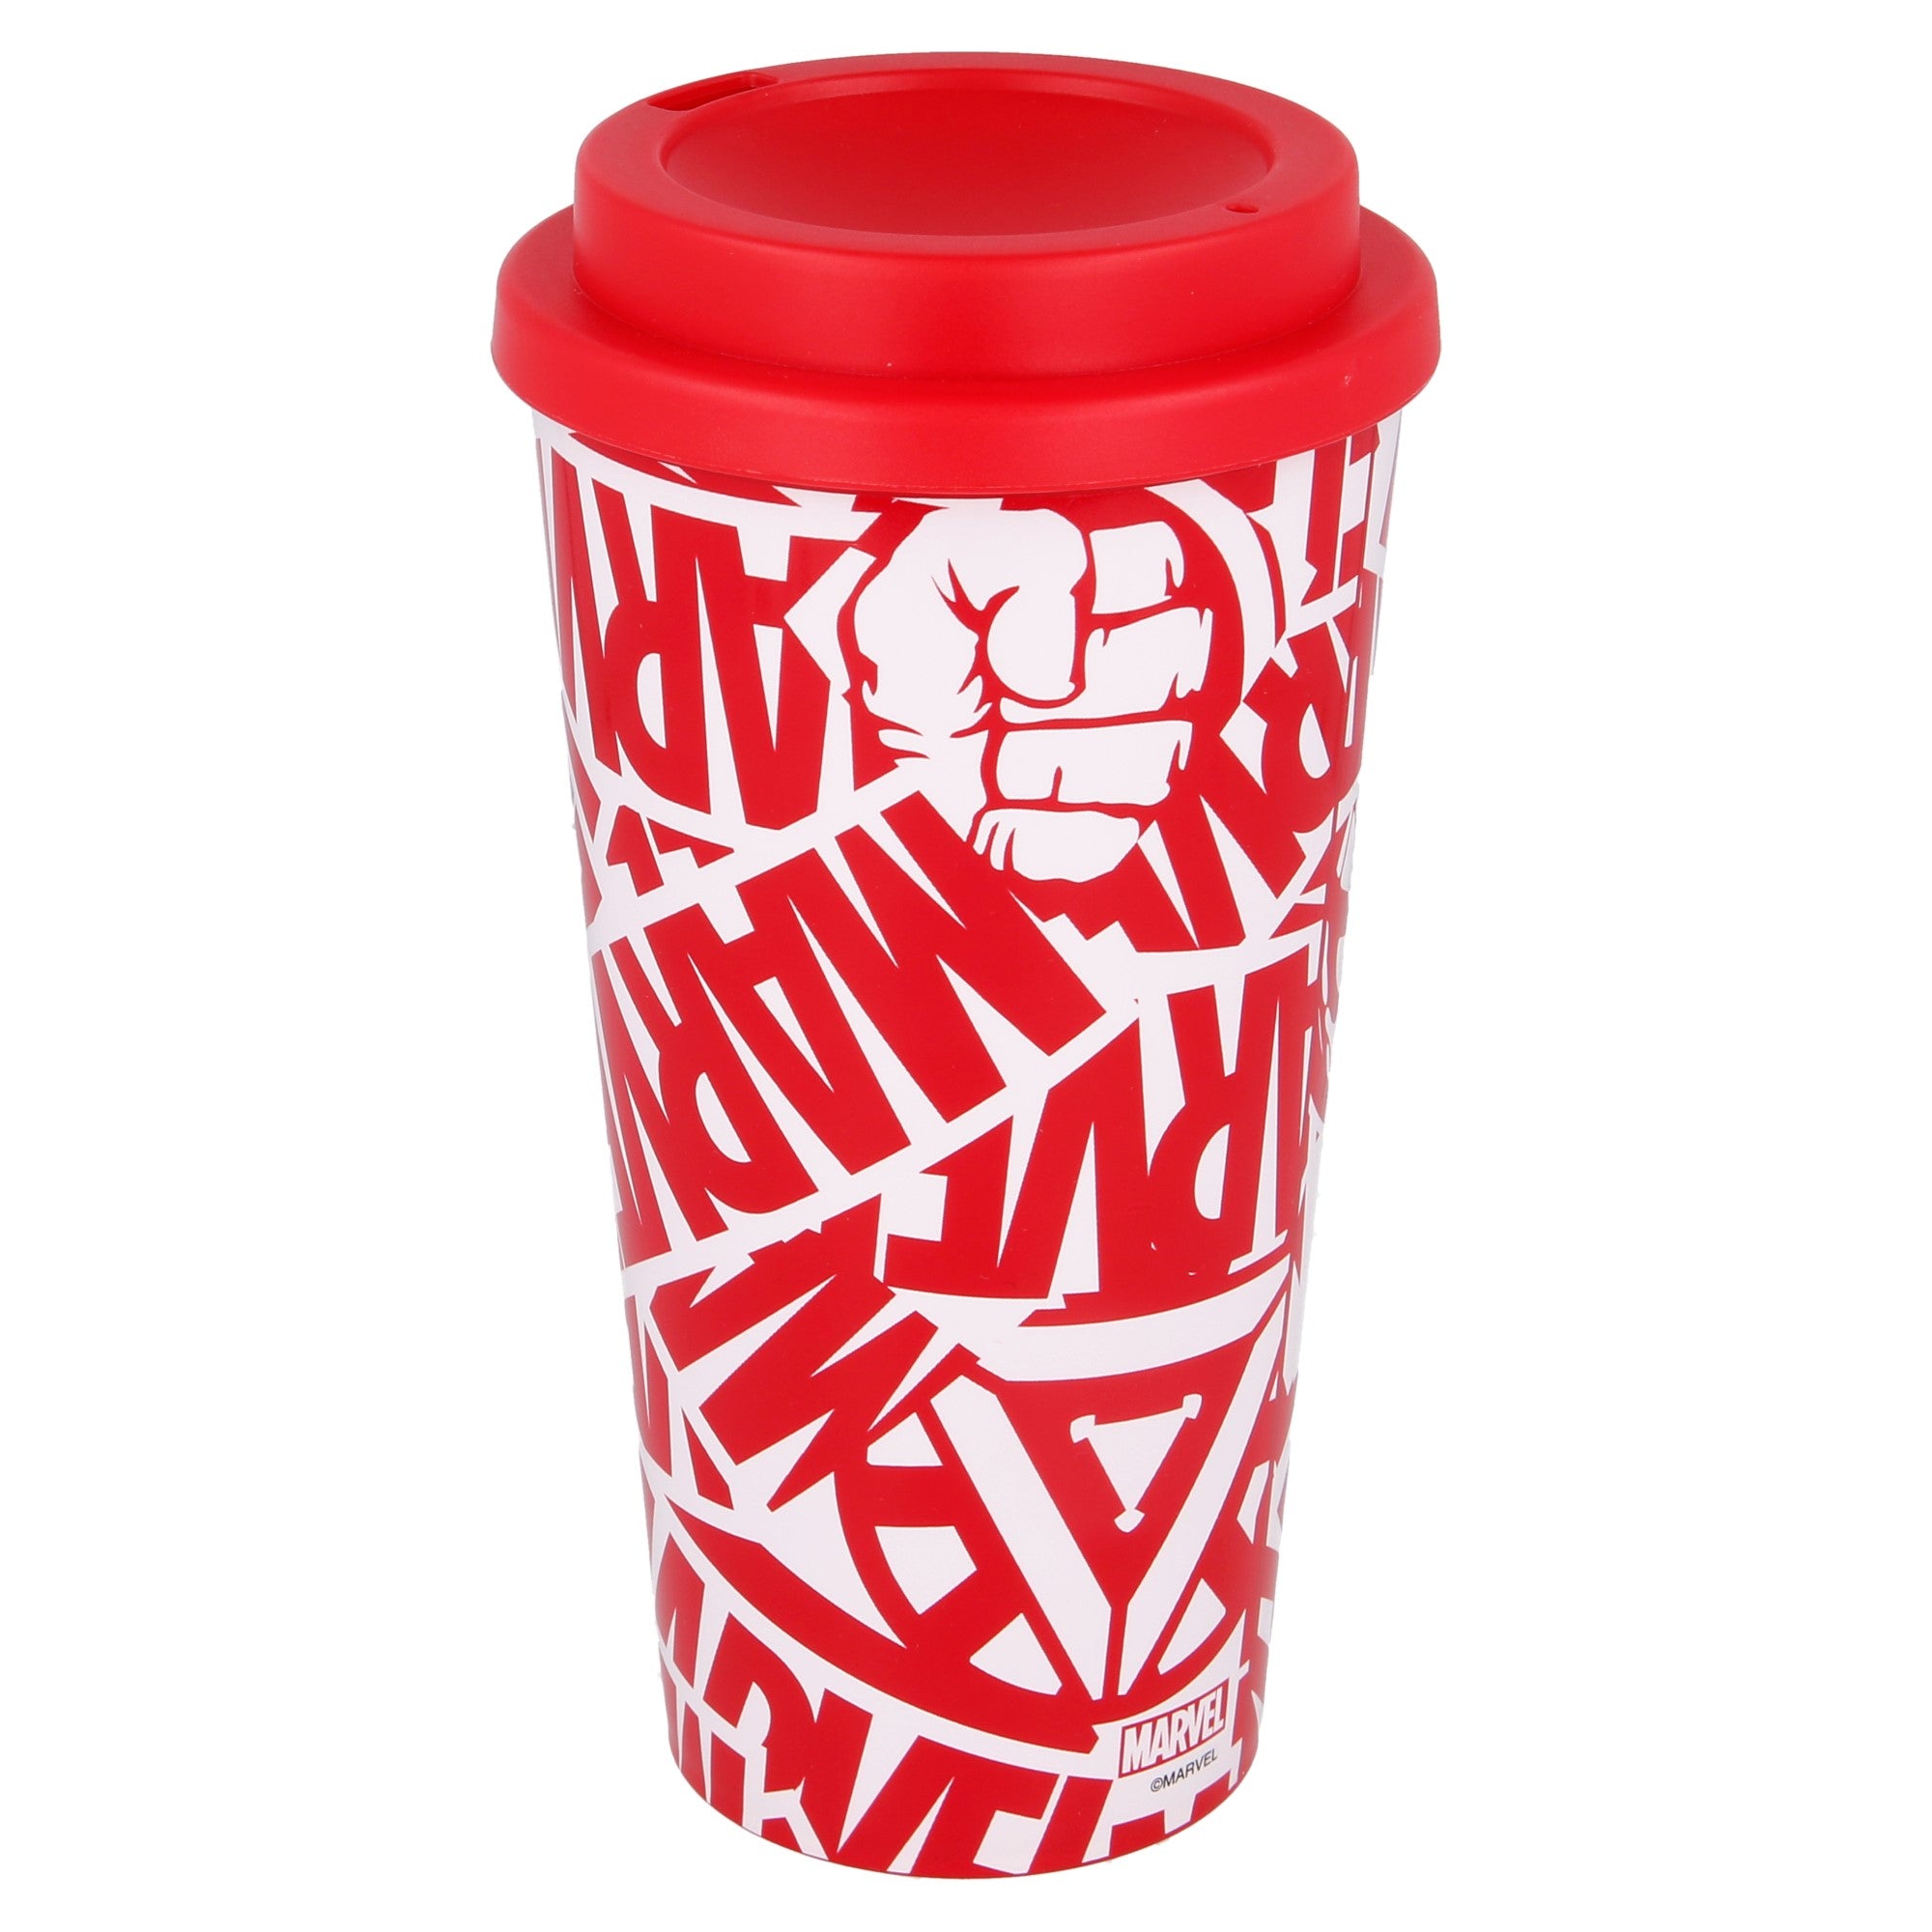 STOR YOUNG ADULT LARGE PP DW COFFEE TUMBLER 520 ML MARVEL AVENGERS